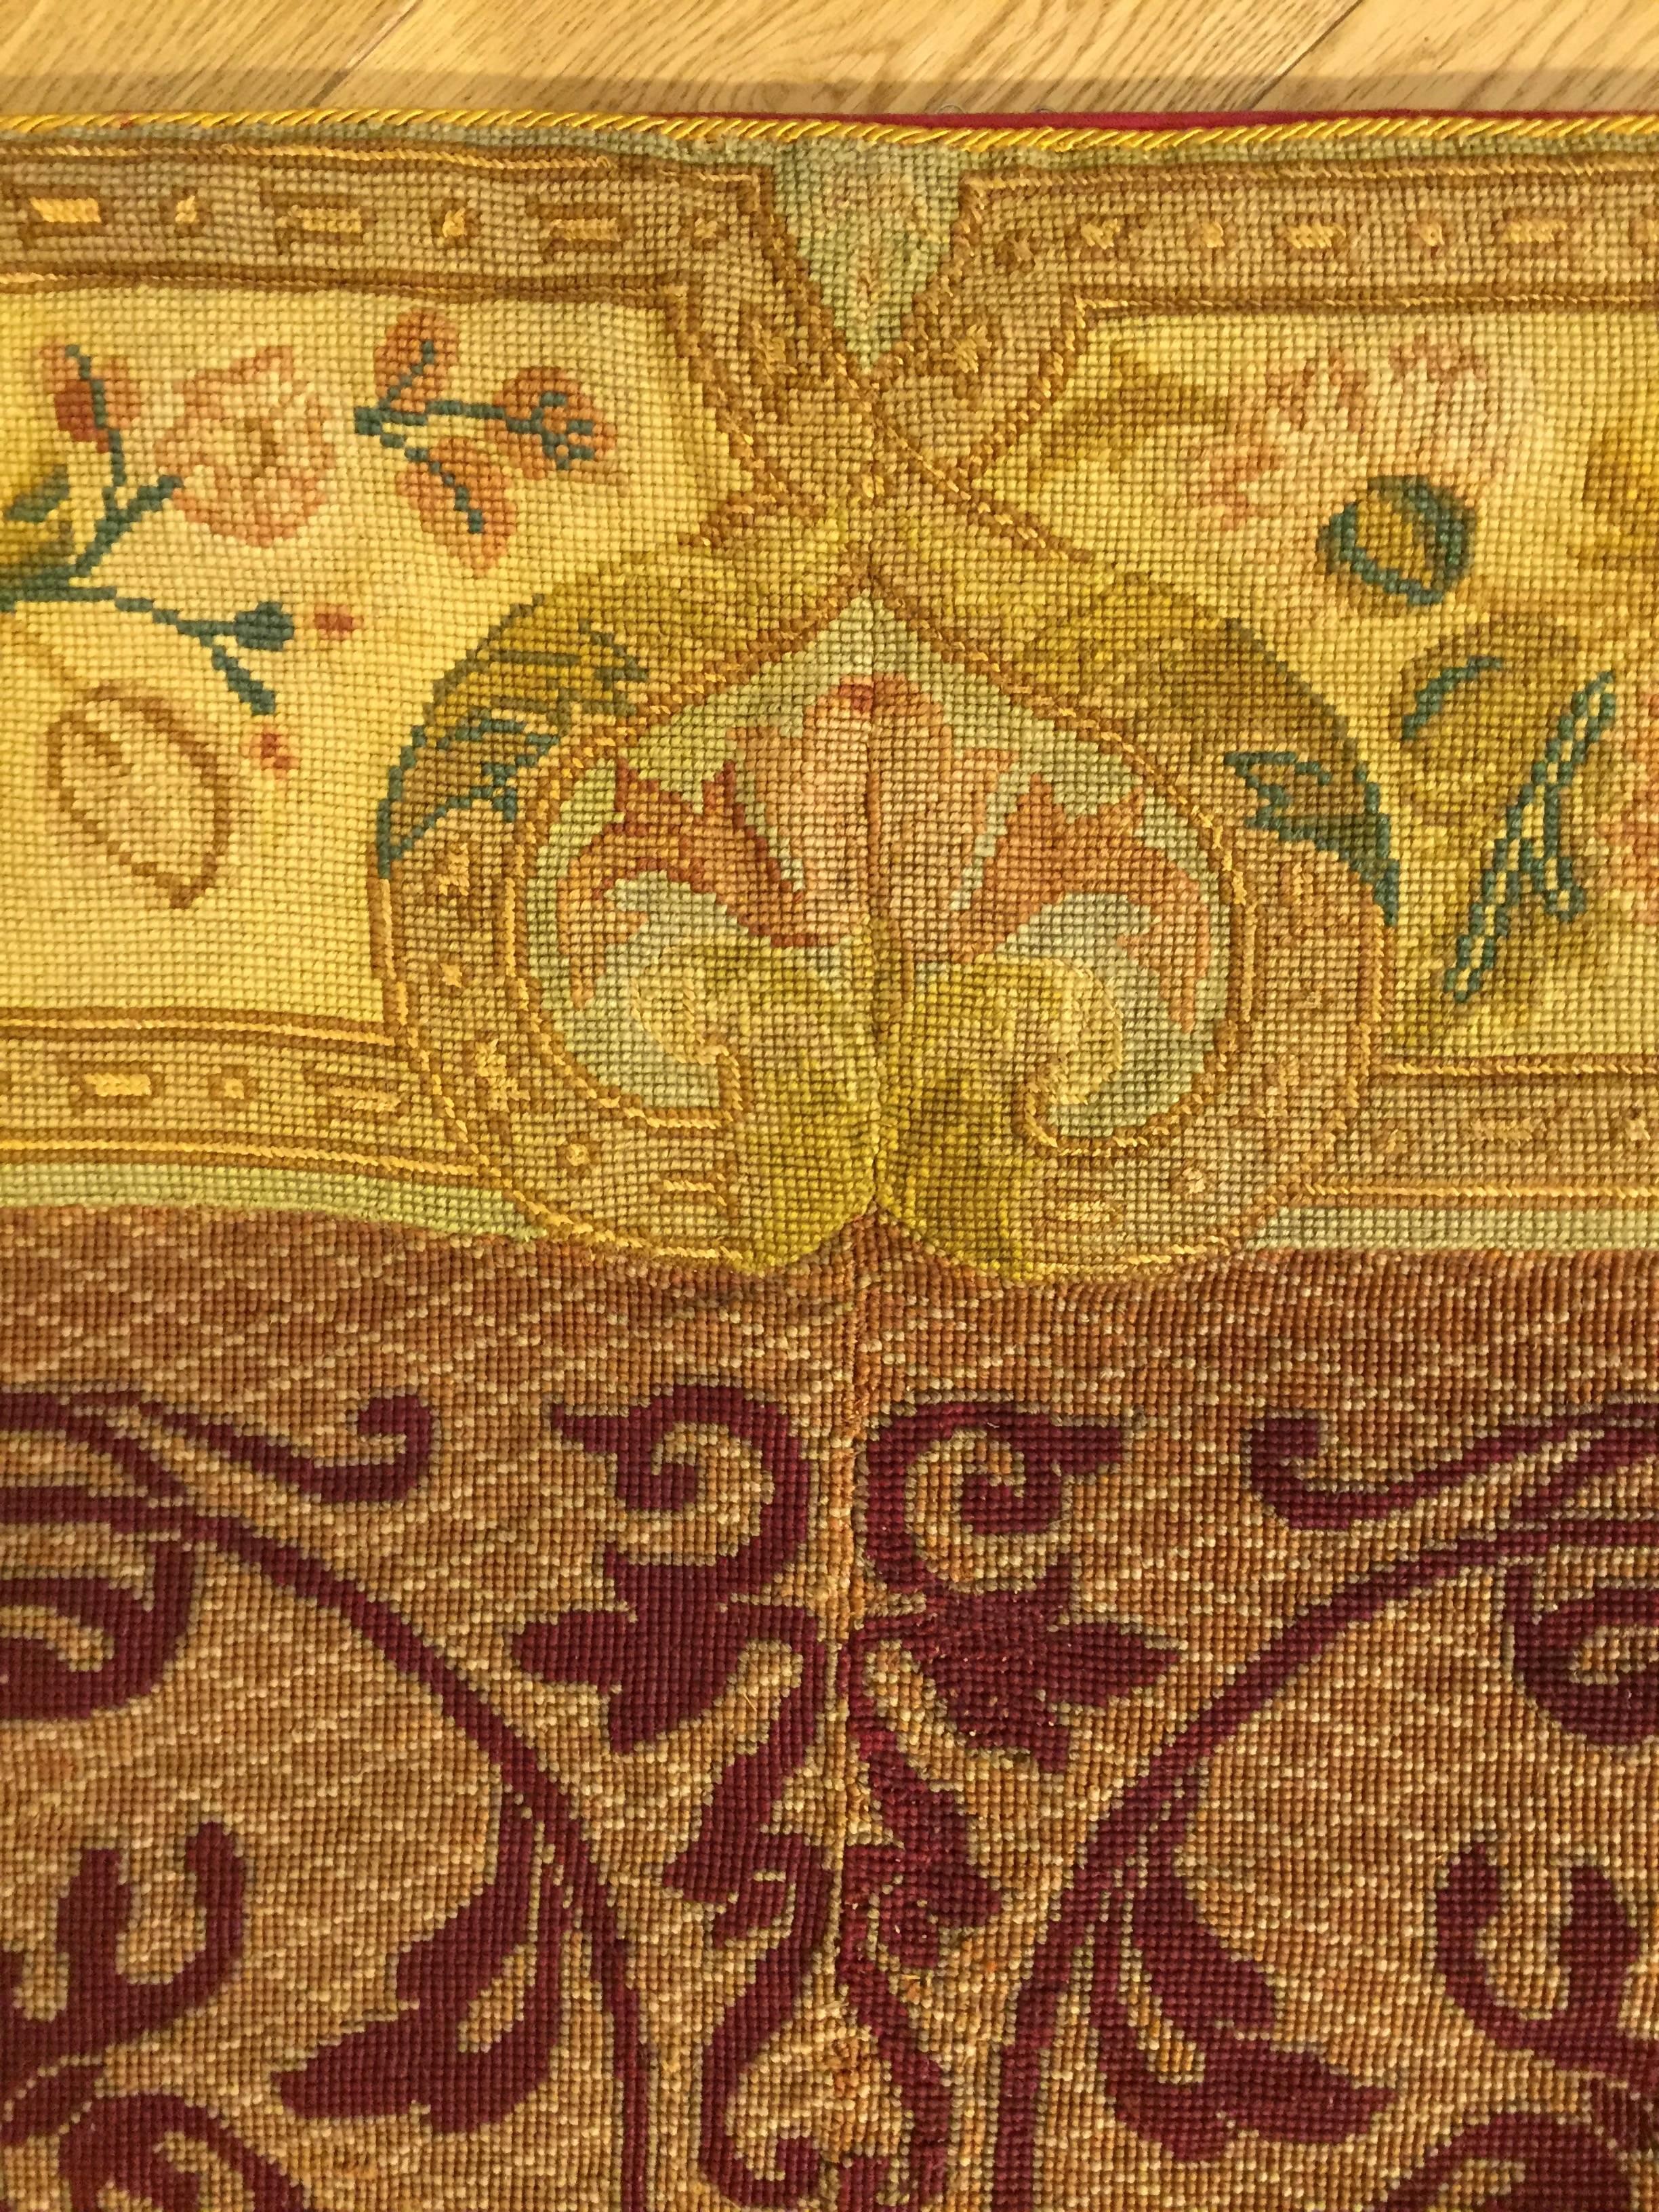 19th Century France Needle Point Hand-Knotted Wool and Silk Red Gold Tapestry For Sale 13